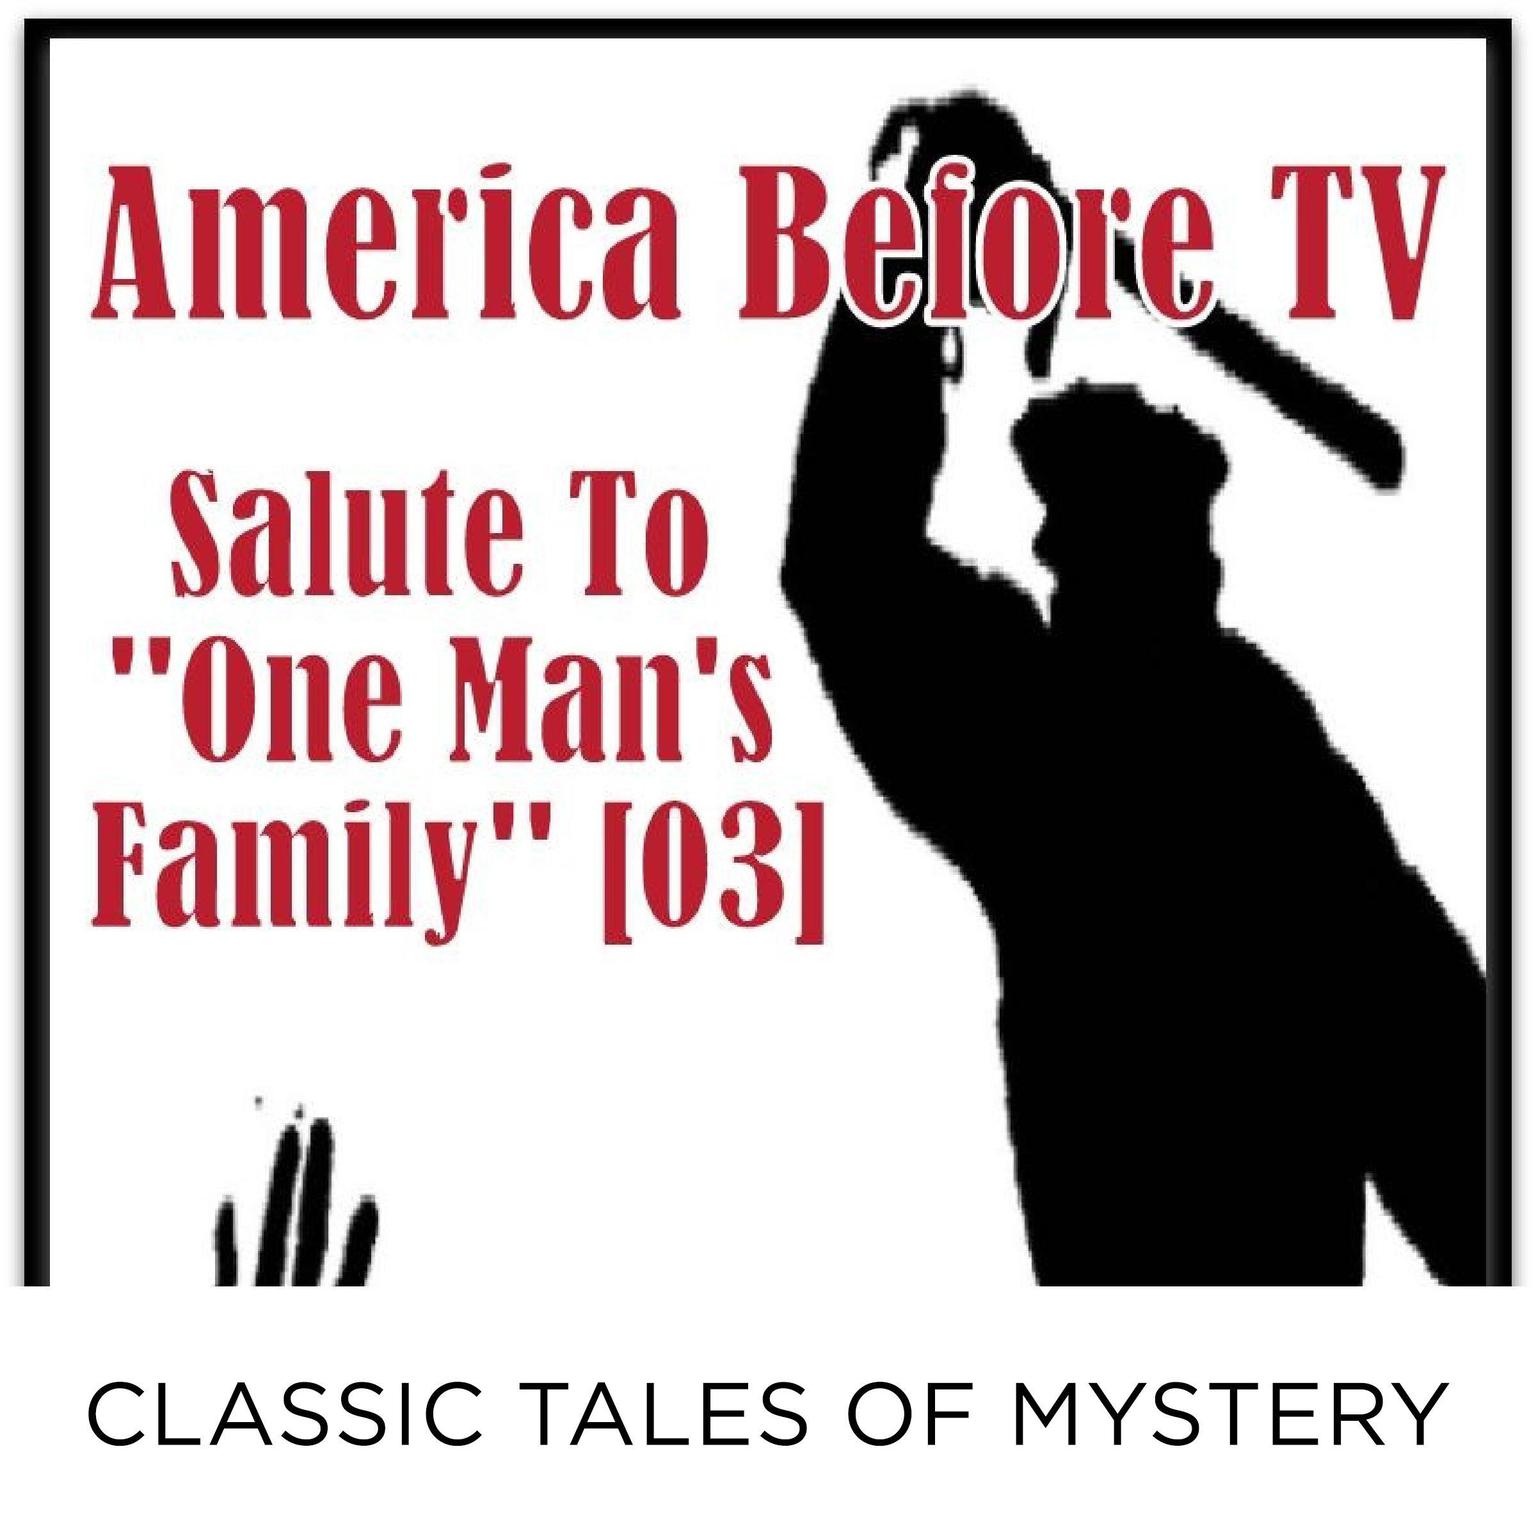 America Before TV - Salute To One Mans Family [03] (Abridged) Audiobook, by Classic Tales of Mystery